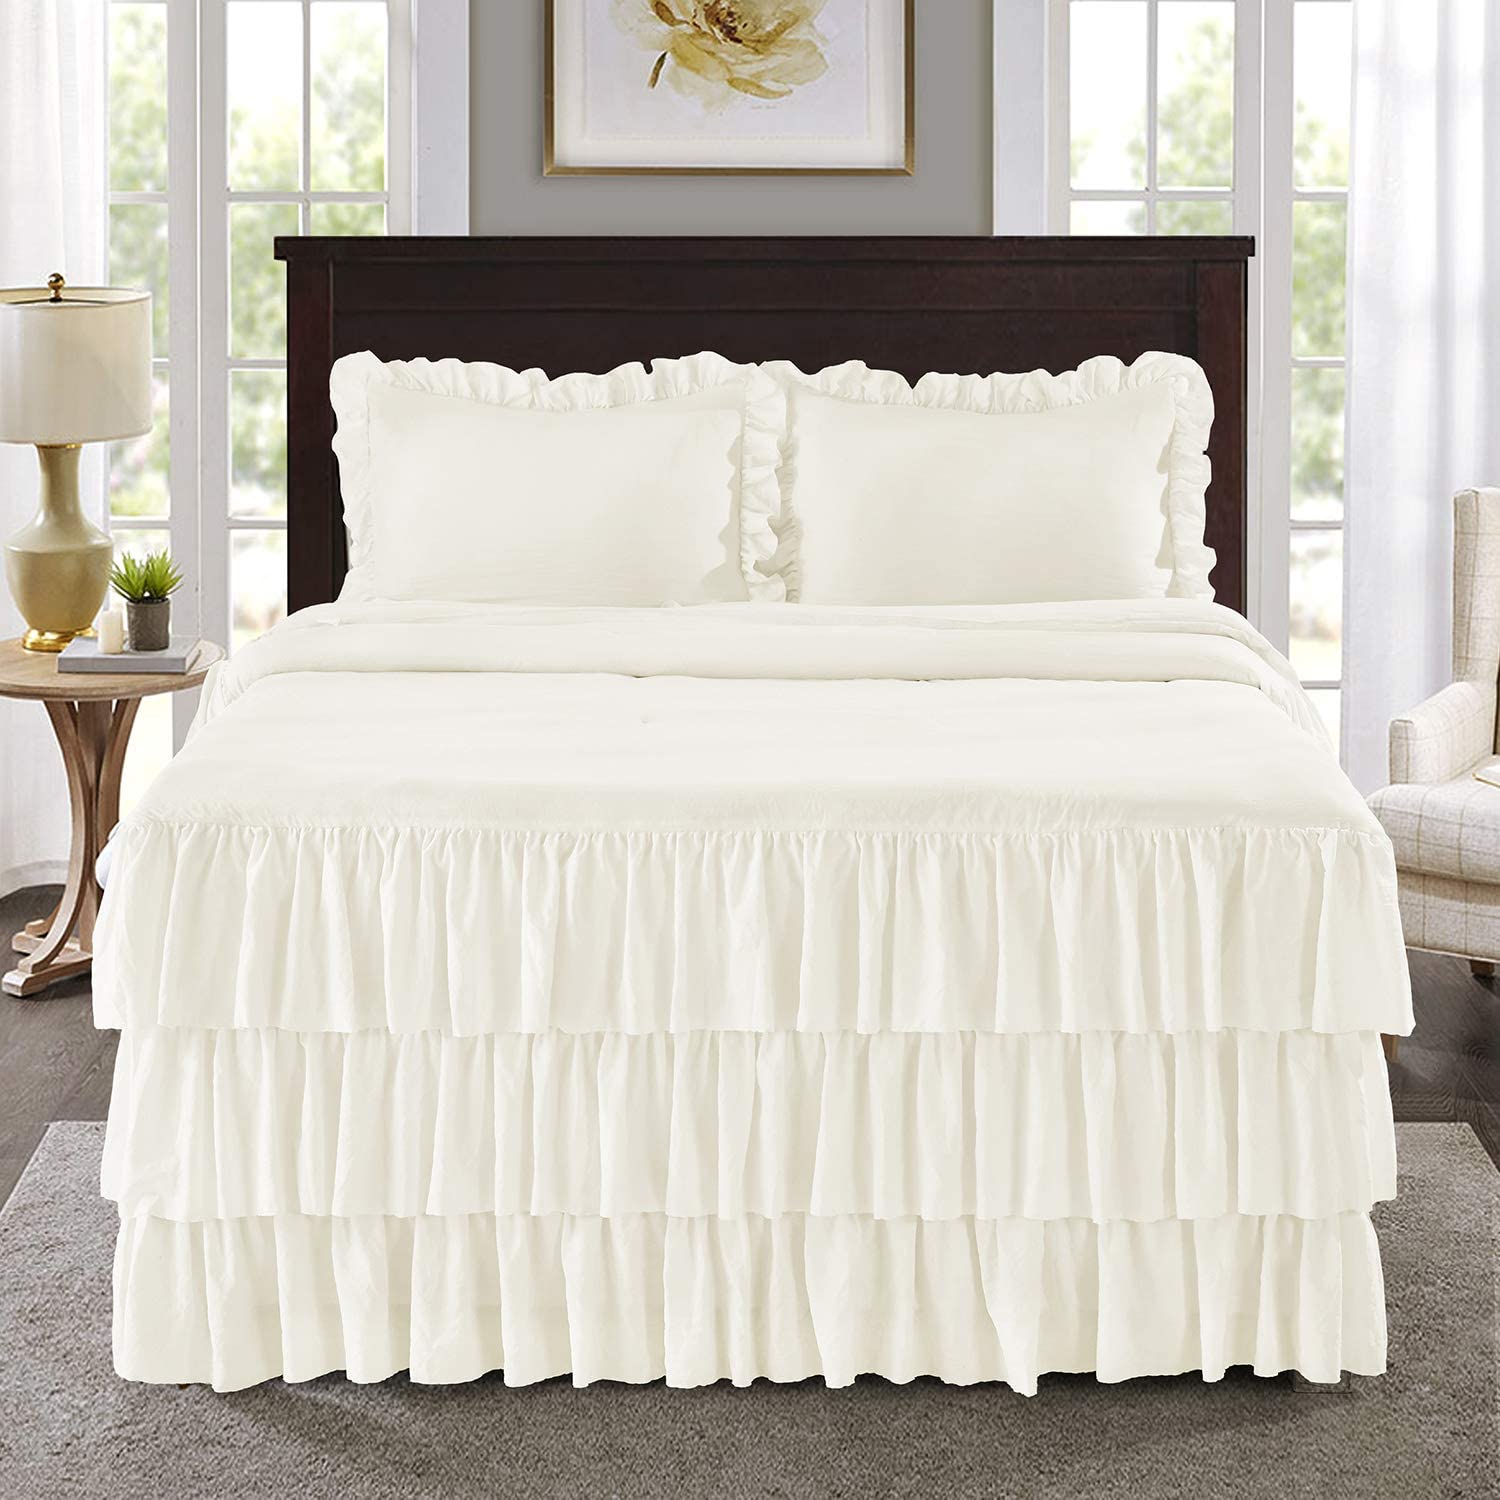 HIG 3 Piece Ruffle Skirt Bedspread Set Queen-Ivory Color 30 inches Drop ...